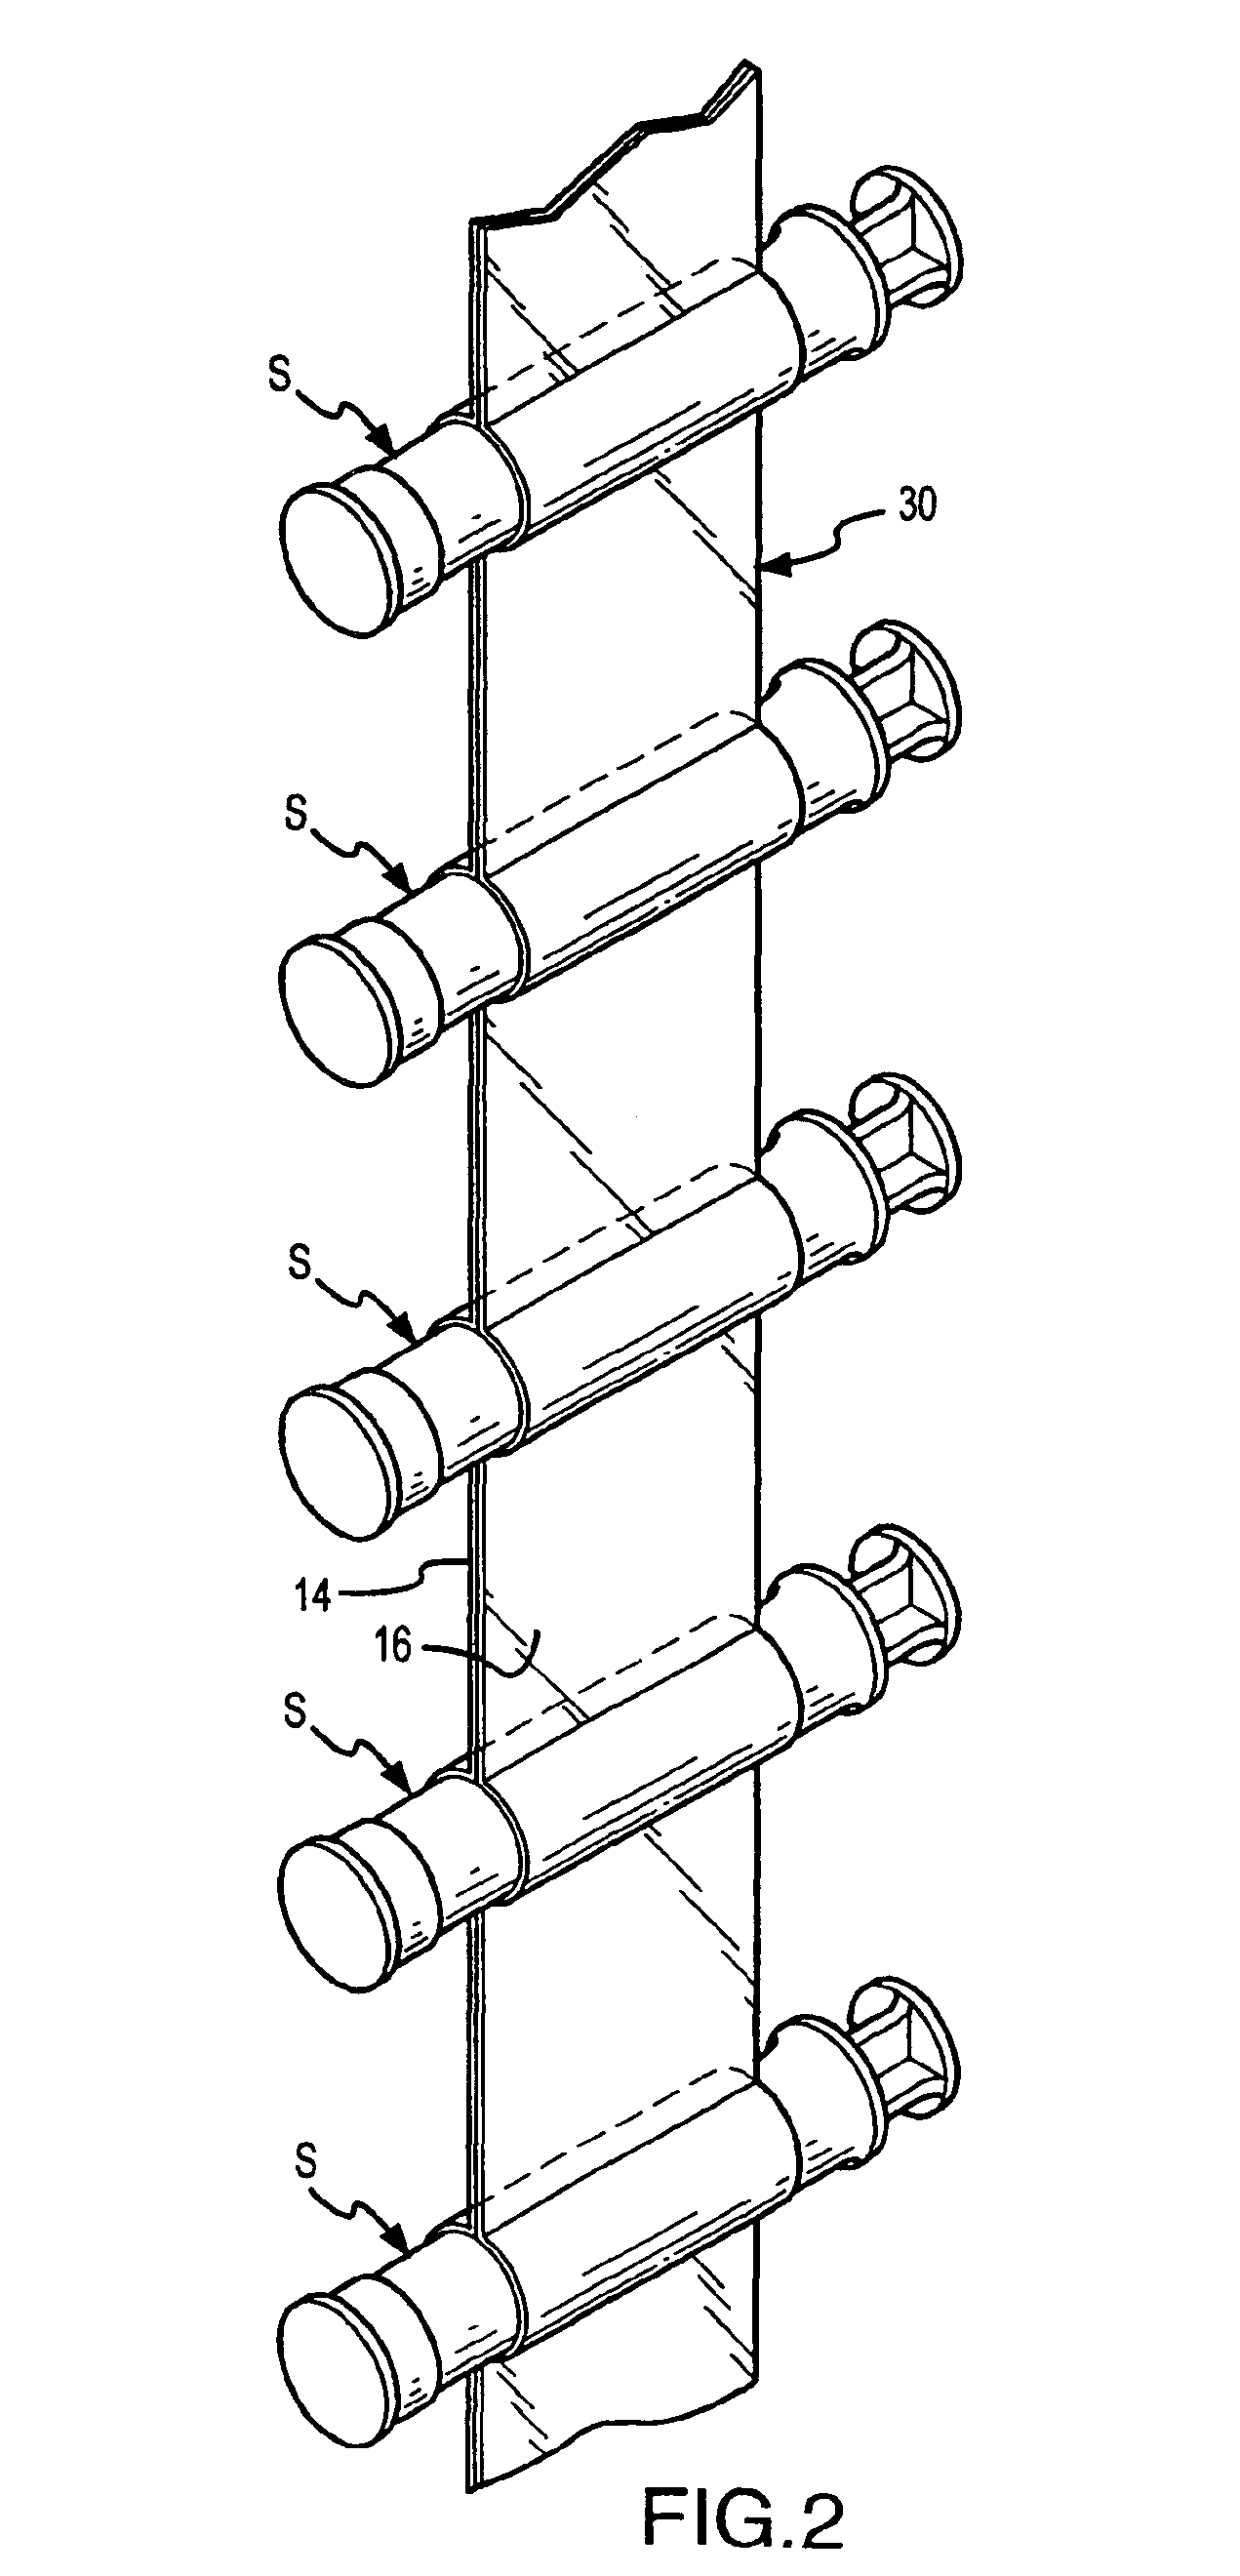 Method for filling and capping syringes